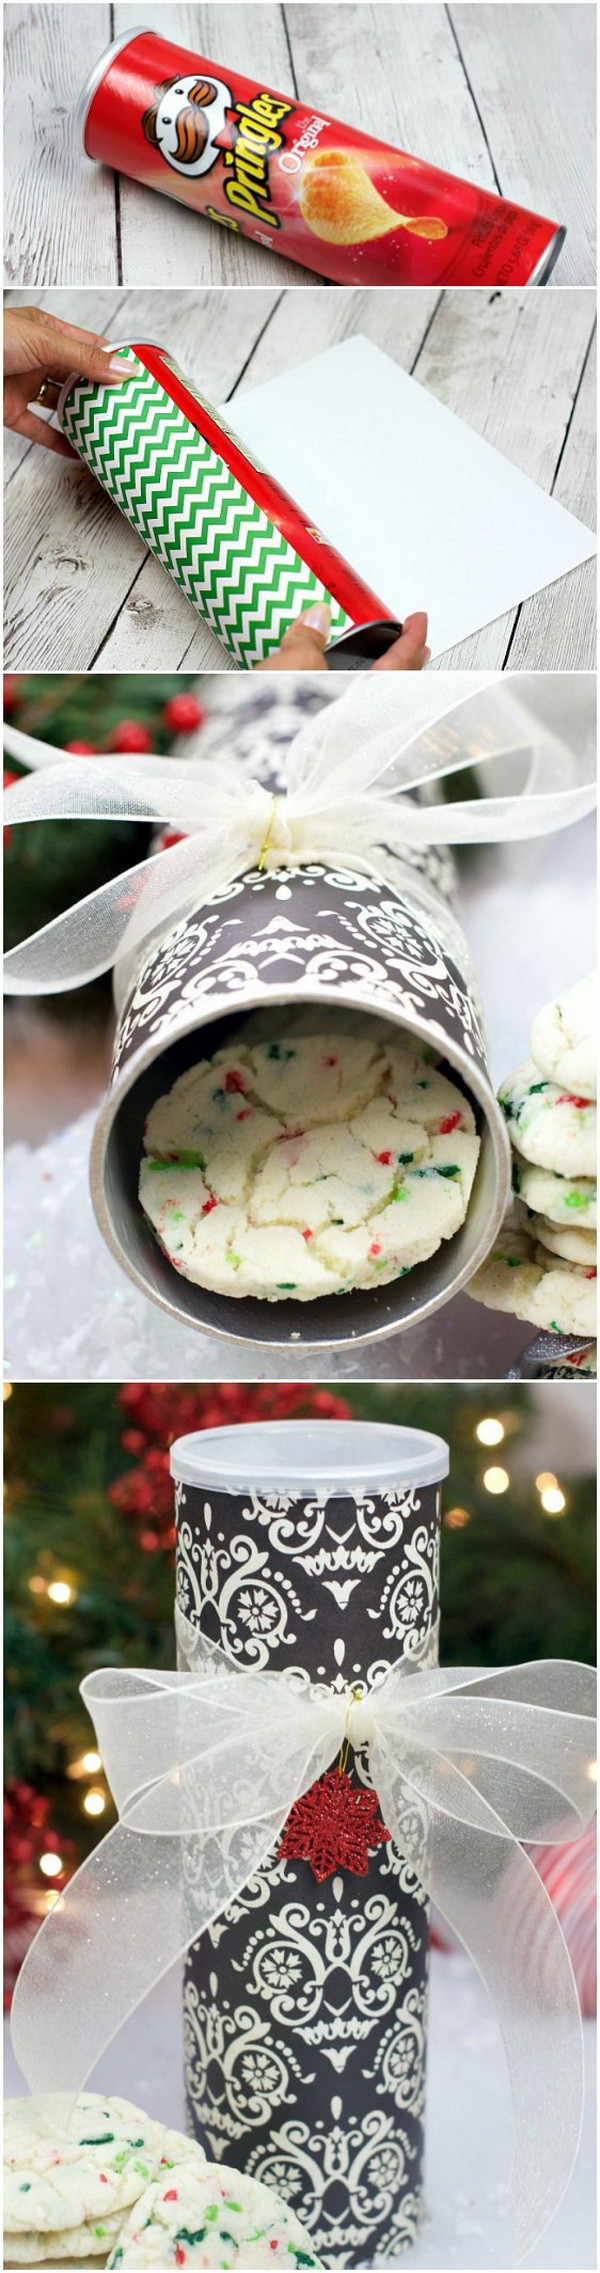 DIY Christmas Gifts Videos
 30 Homemade Christmas Gifts Everyone will Love For